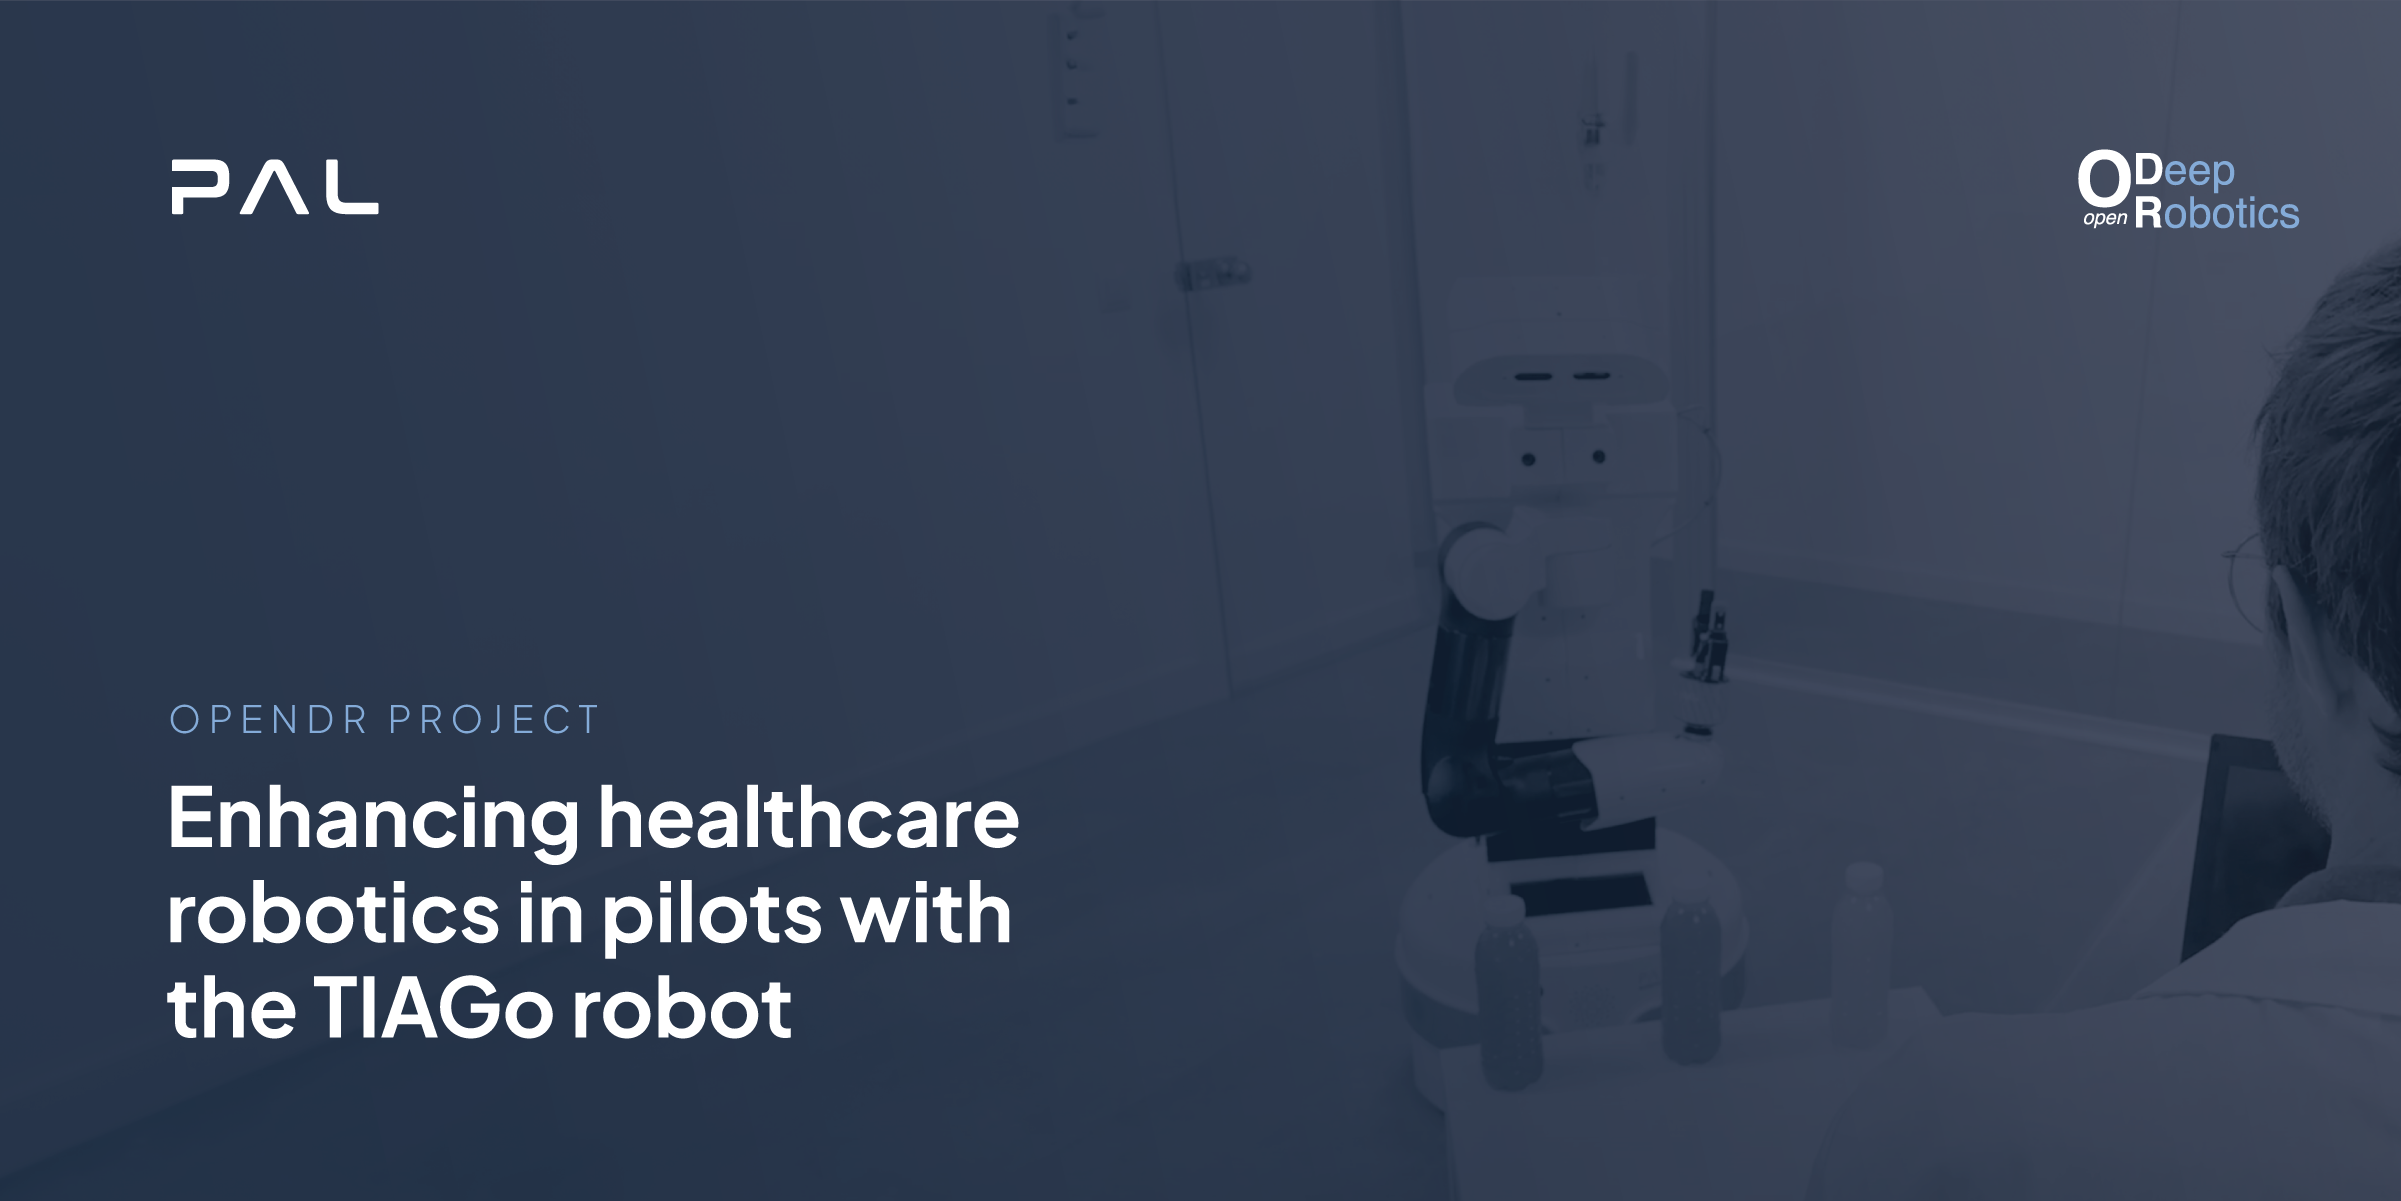 Promotional graphic for the OPENDR PROJECT by PAL Robotics and Deep open Robotics, highlighting the enhancement of healthcare robotics in pilots with the TIAGo robot. The image shows a blue-tinted room where a person with their back to the camera is observing the TIAGo robot, which is equipped with a mechanical arm and various sensors, positioned near a white cabinet.